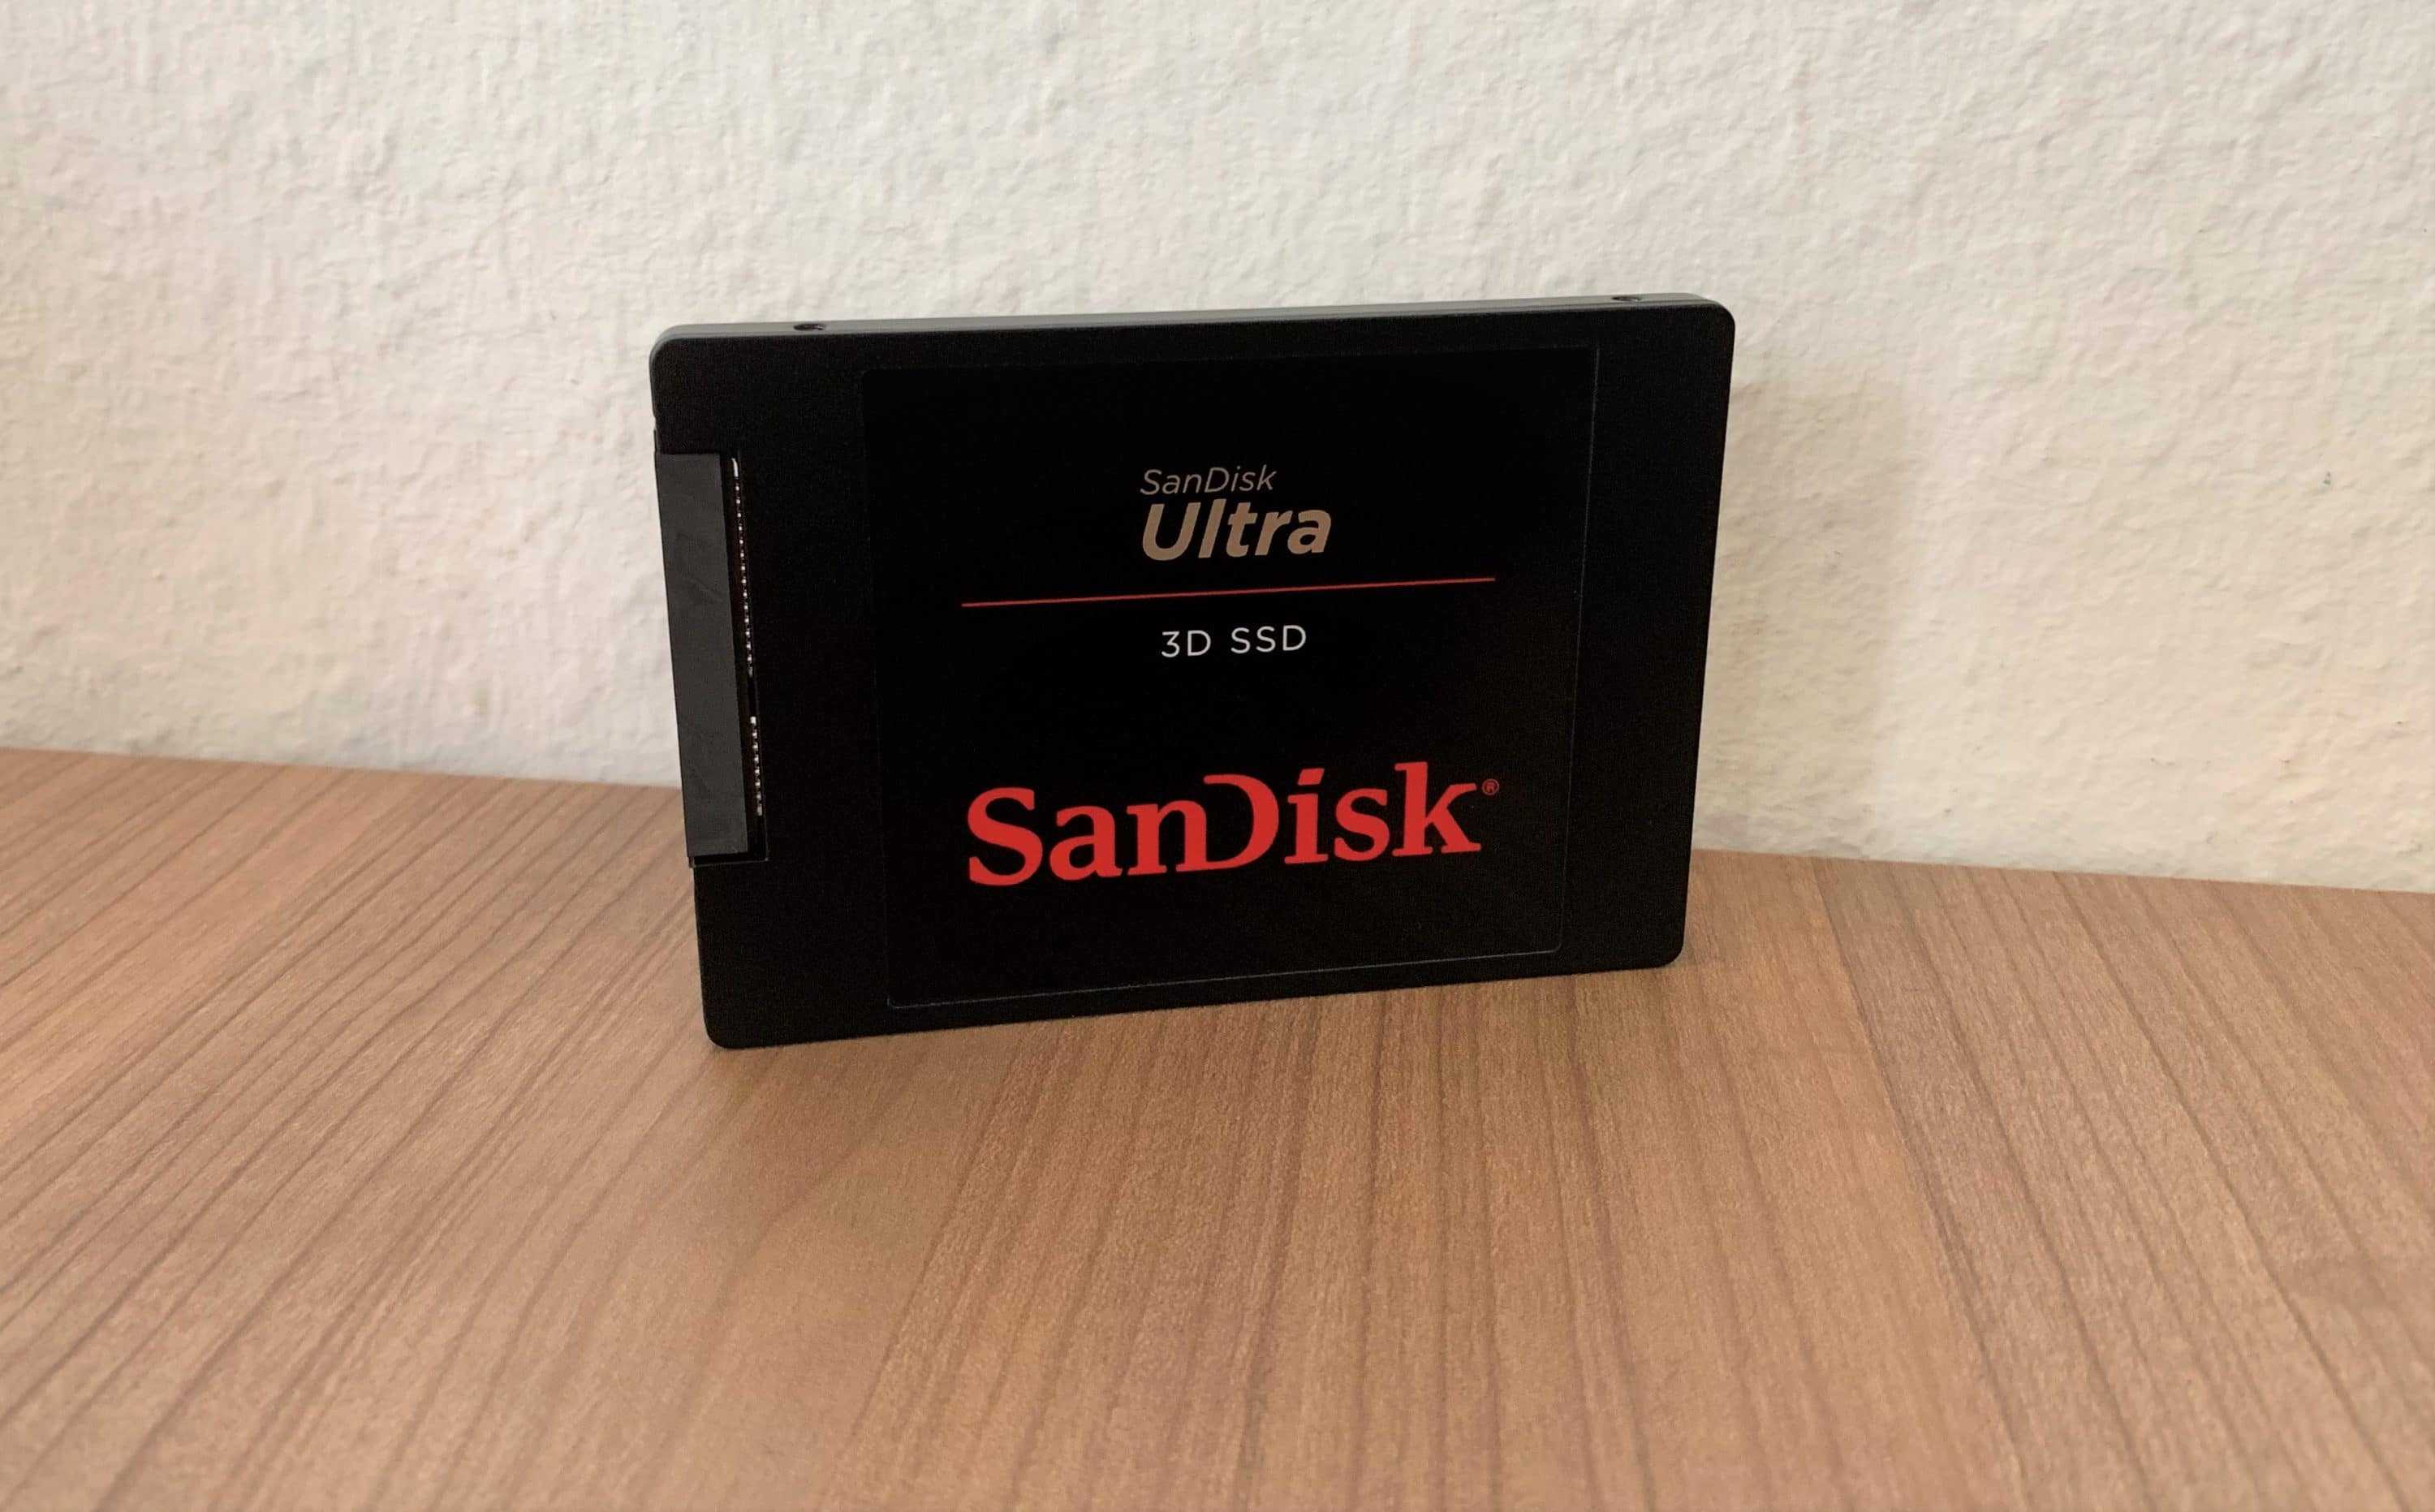 Review SanDisk Ultra 3D 500 GB SSD